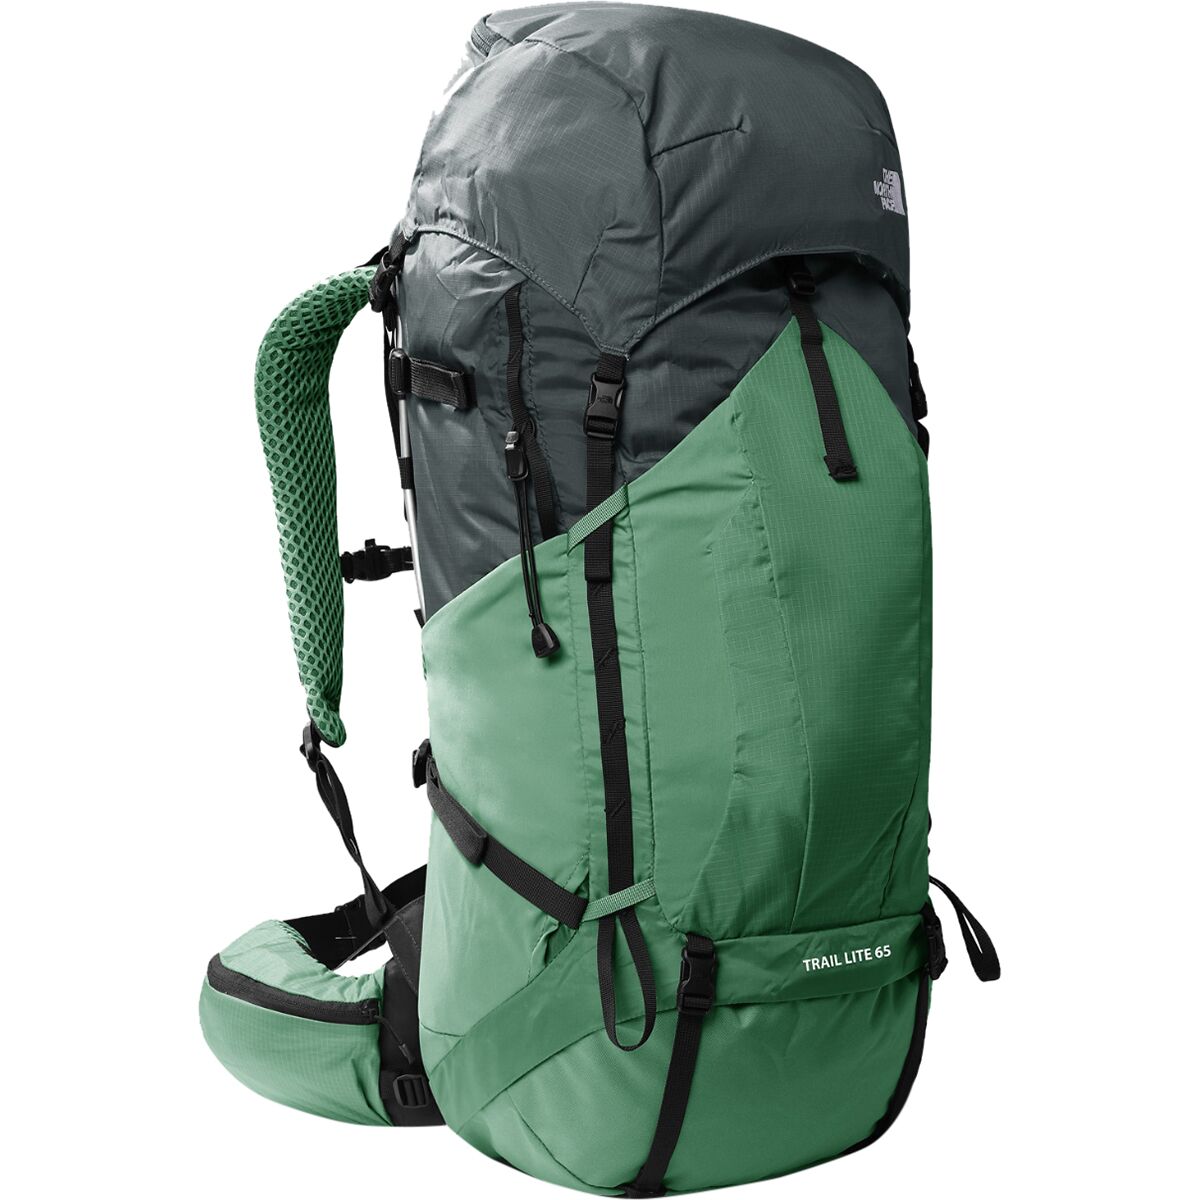 The North Face Trail Lite 65L Backpack